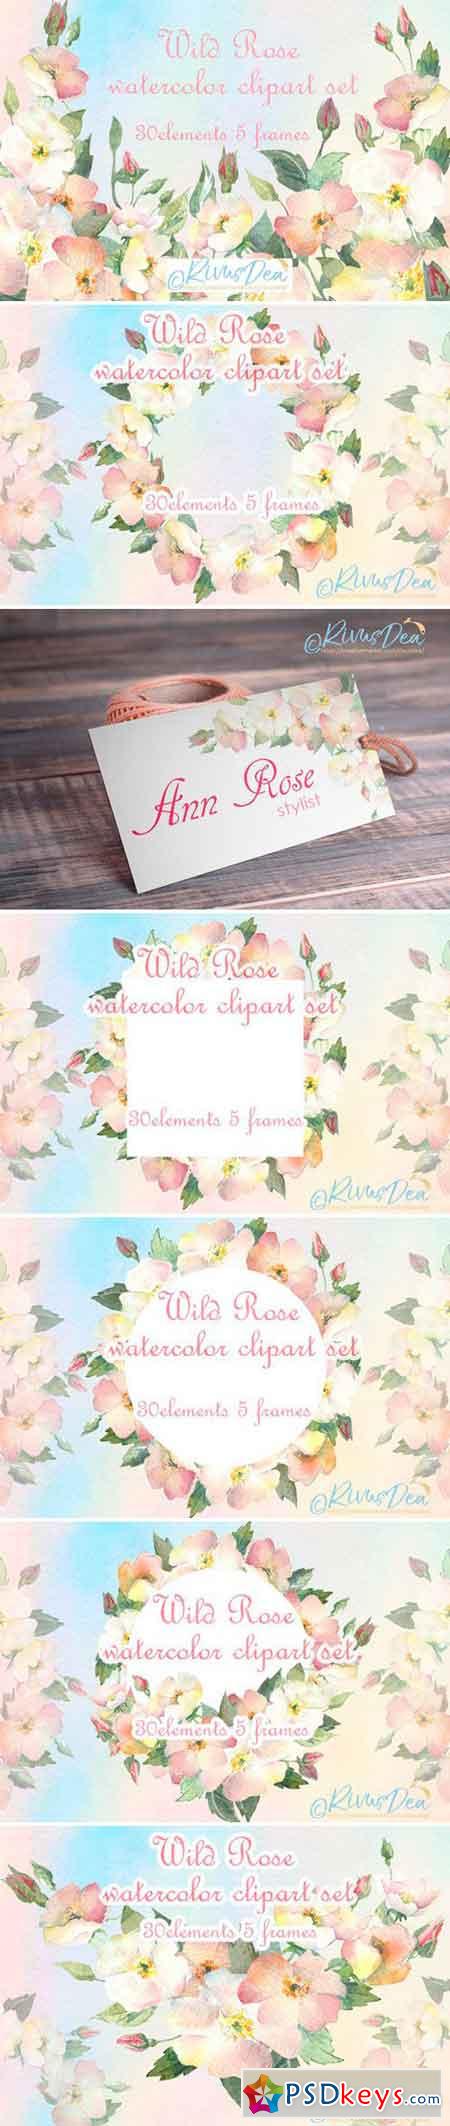 Watercolor wild dog rose clipart set 2515098